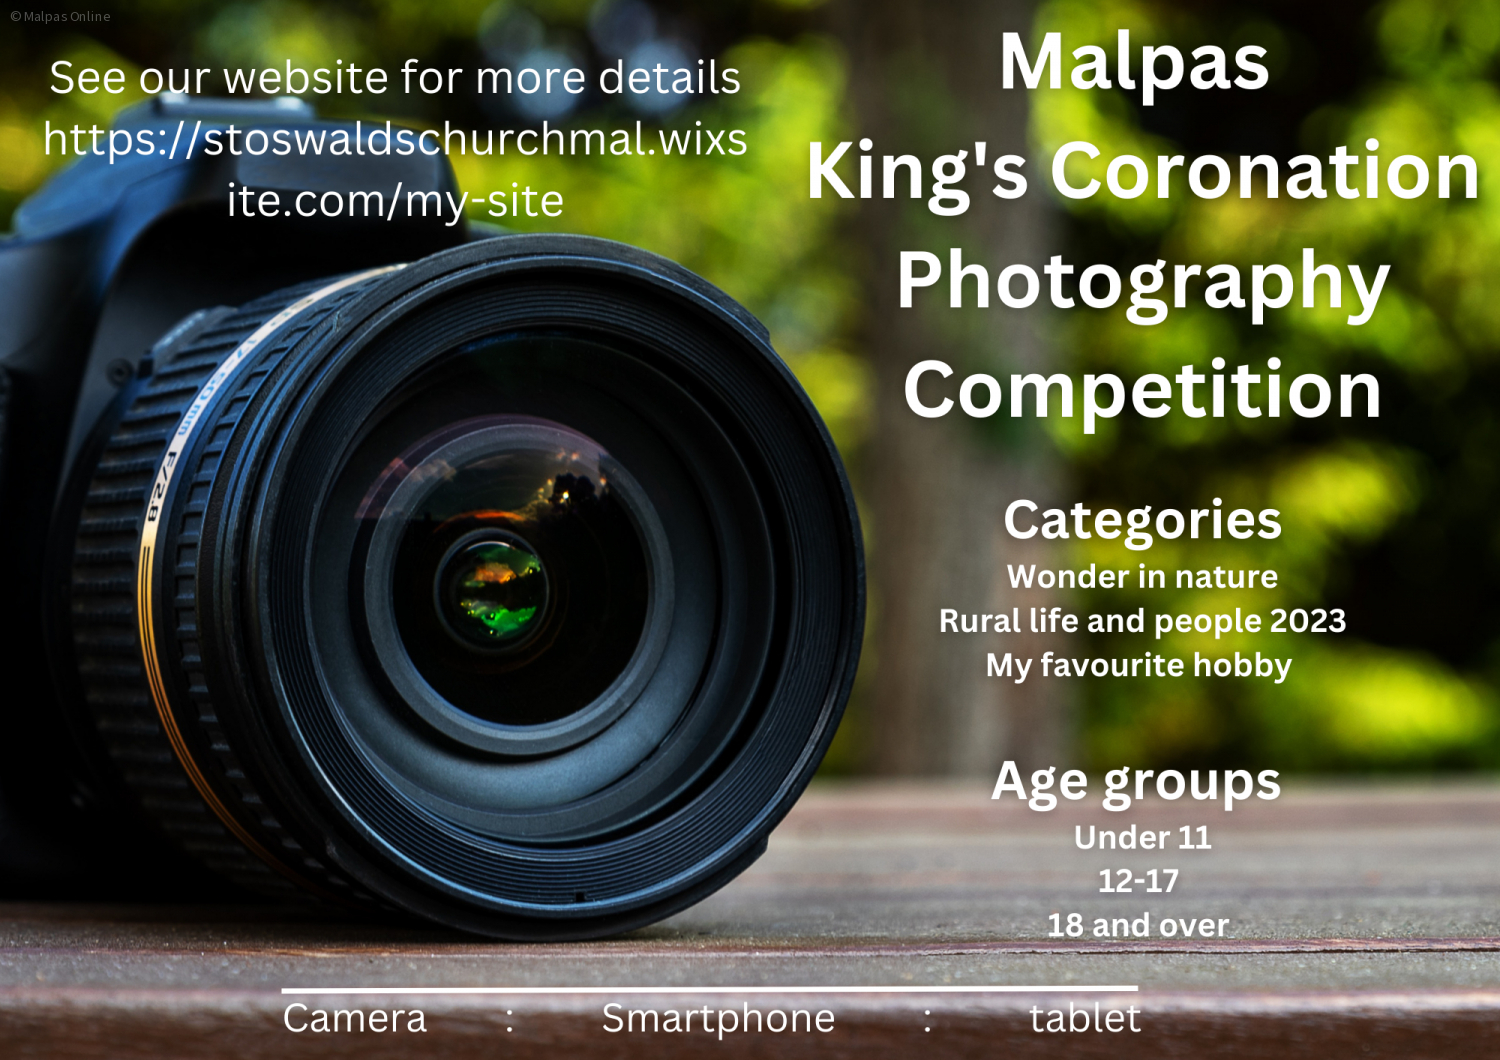 photo competition